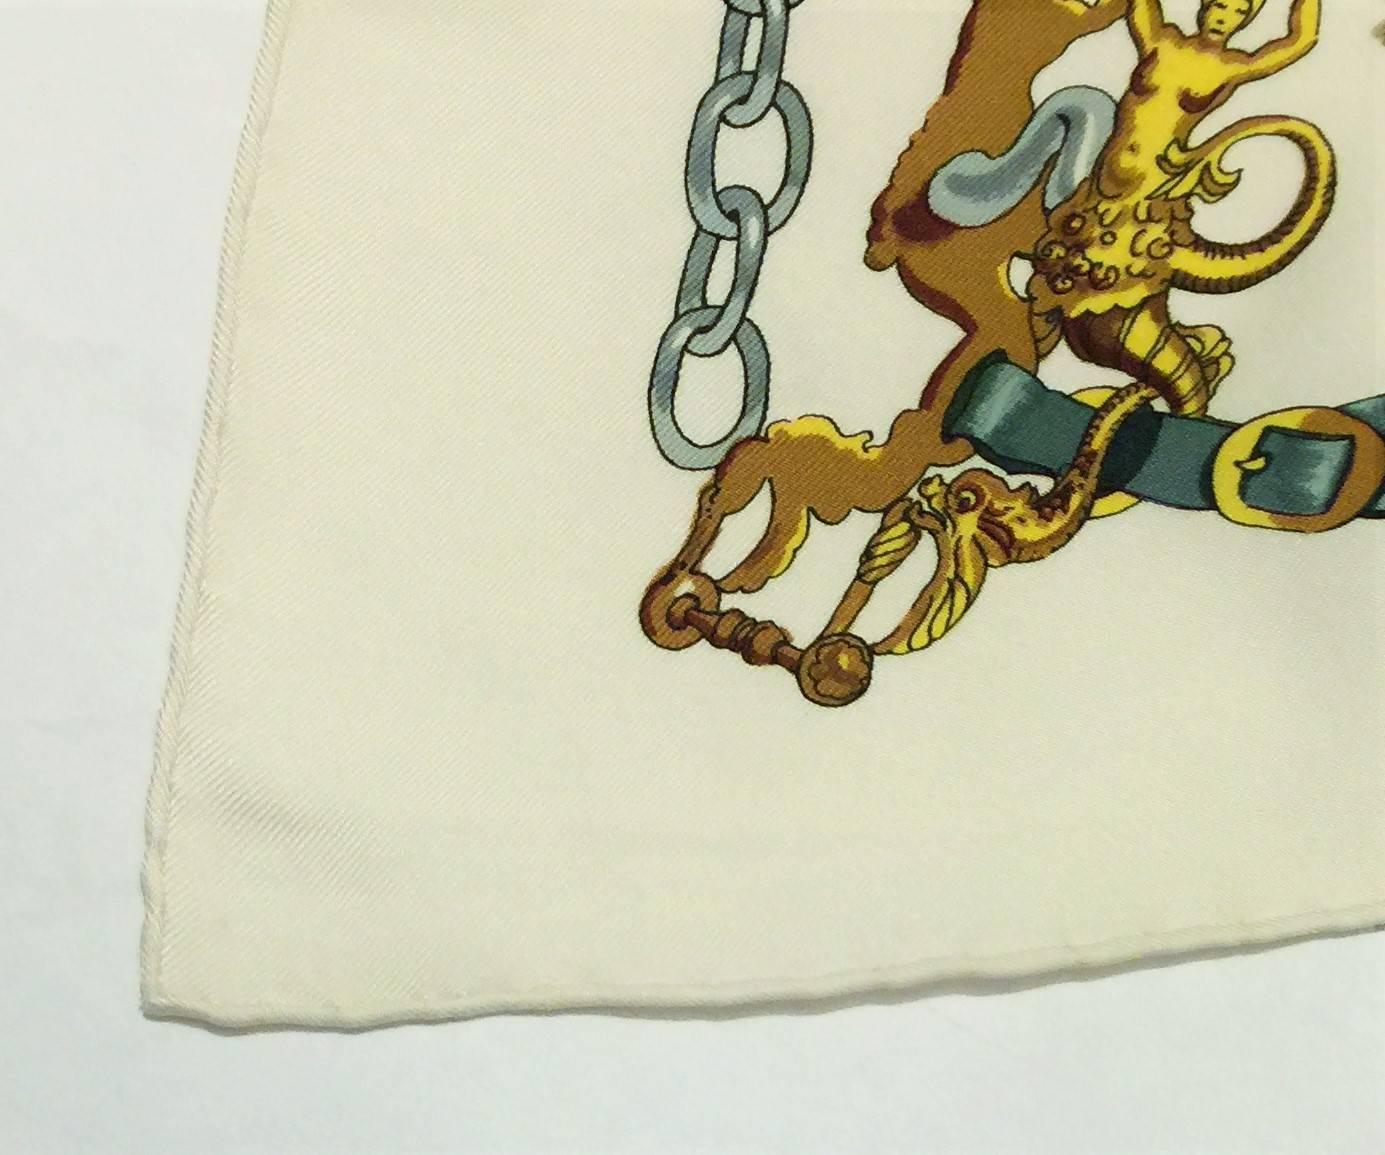 Hermes Paris Vintage Authentic Hermes ‘Musee’ a Classical Hermes 100% Silk Twill 5